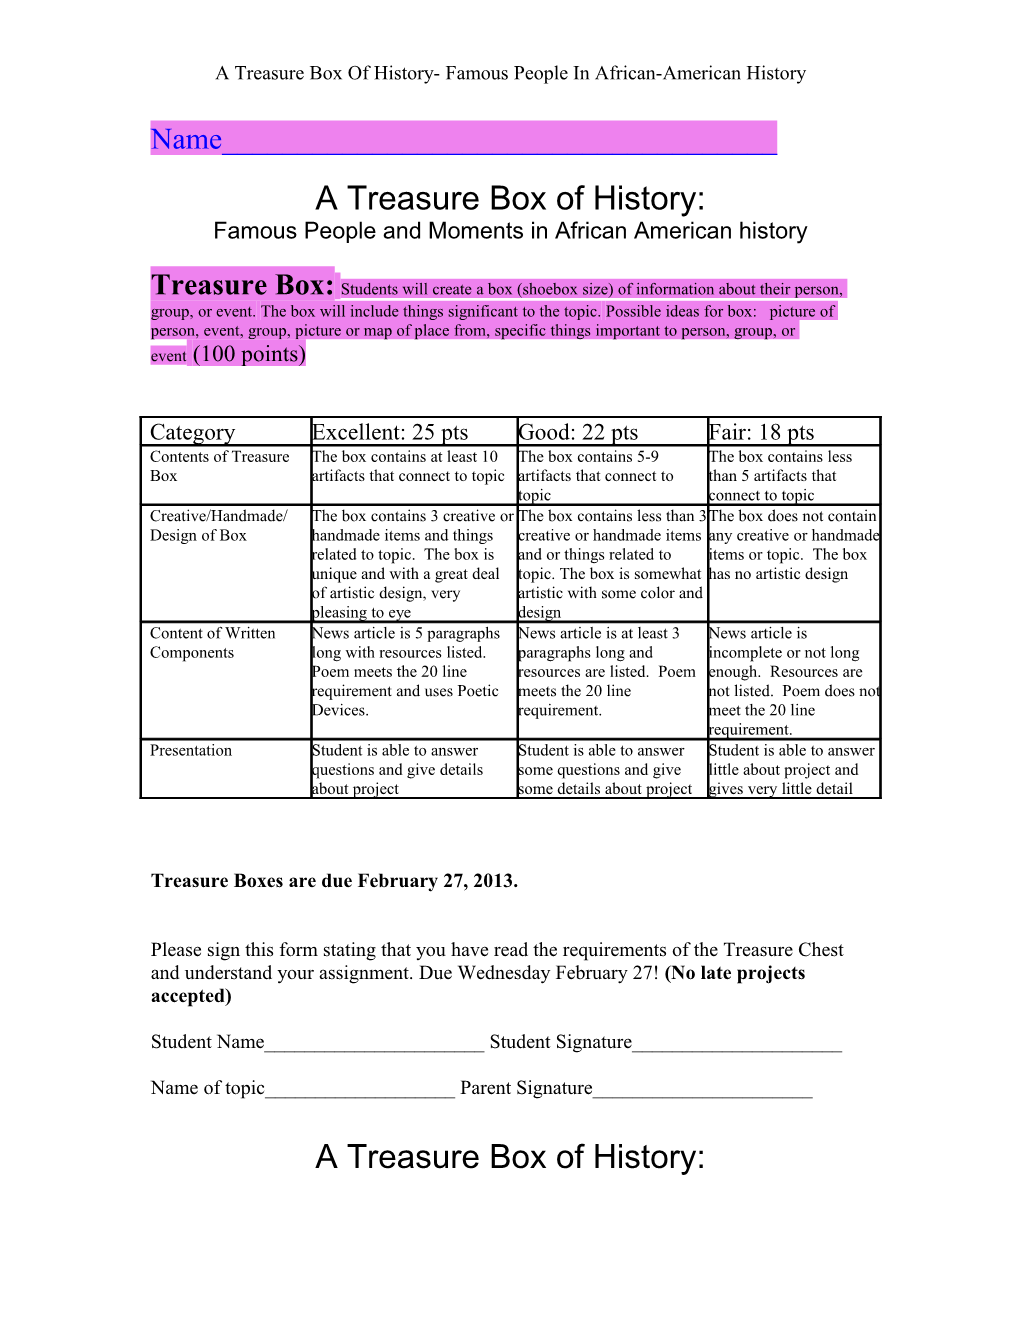 A Treasure Box of History- Famous People in African-American History